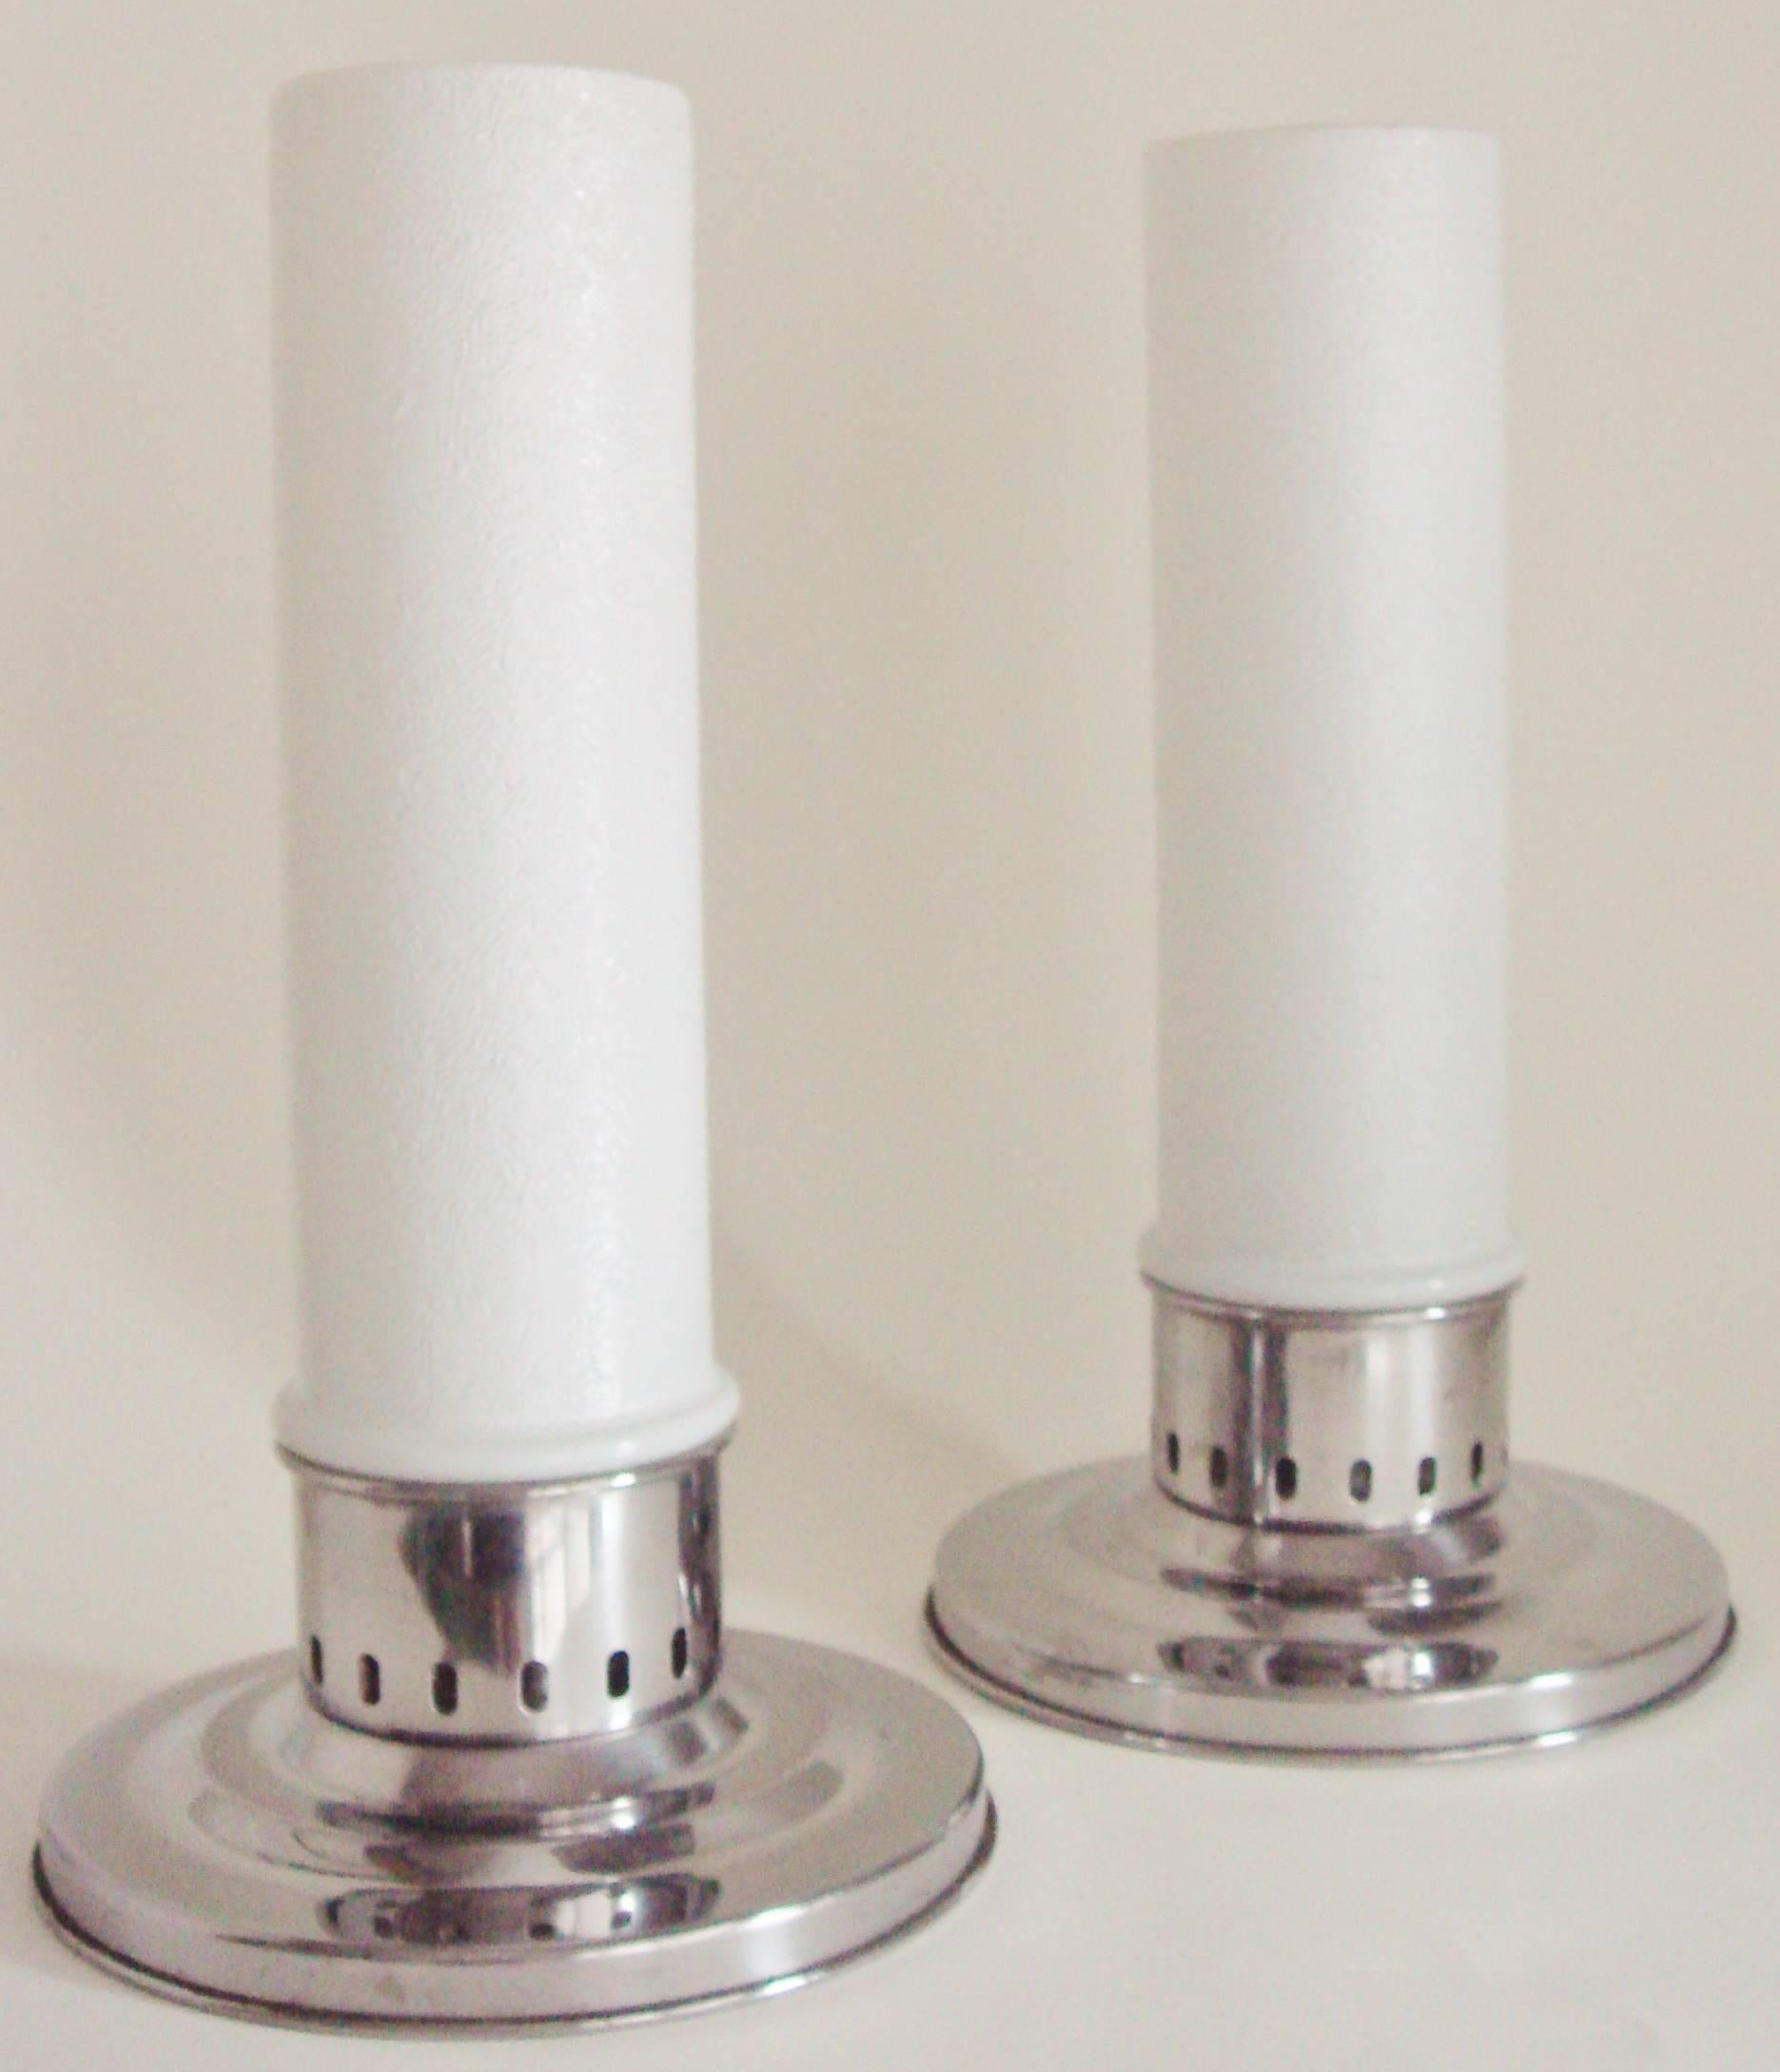 Mid-20th Century Pair of American Mid-Century Chrome and Milk Glass Candle Lamps by Bloomfield.